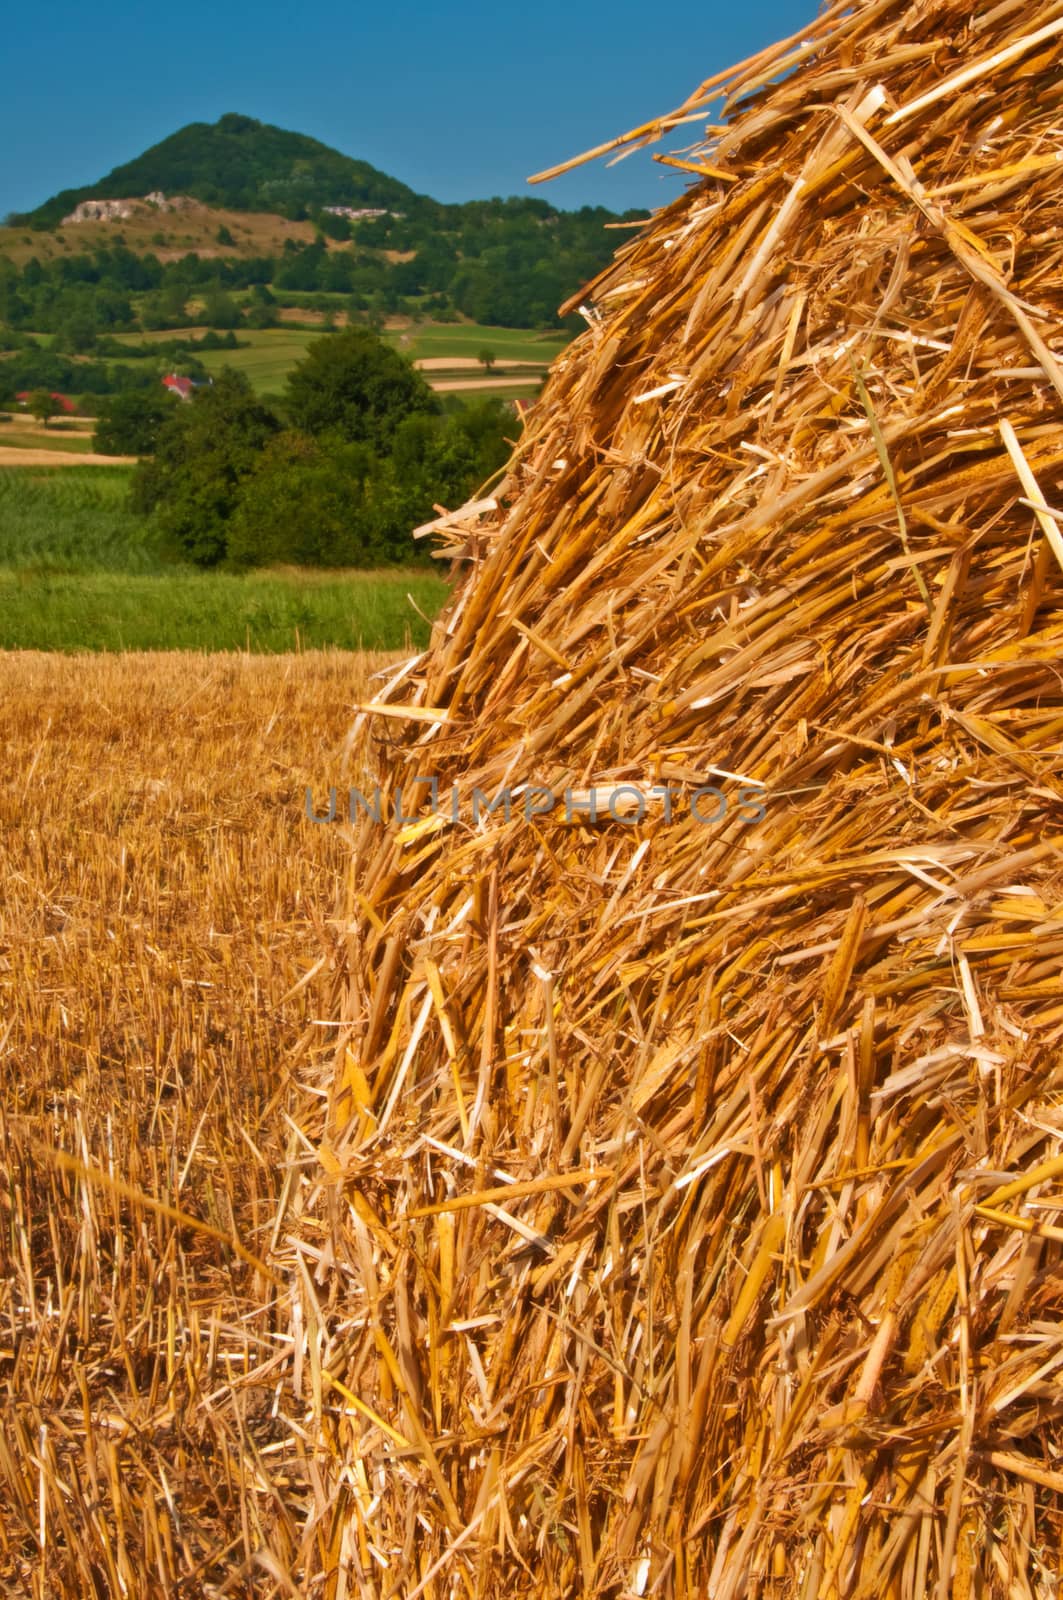 bale of straw with a panoramic view to a hill